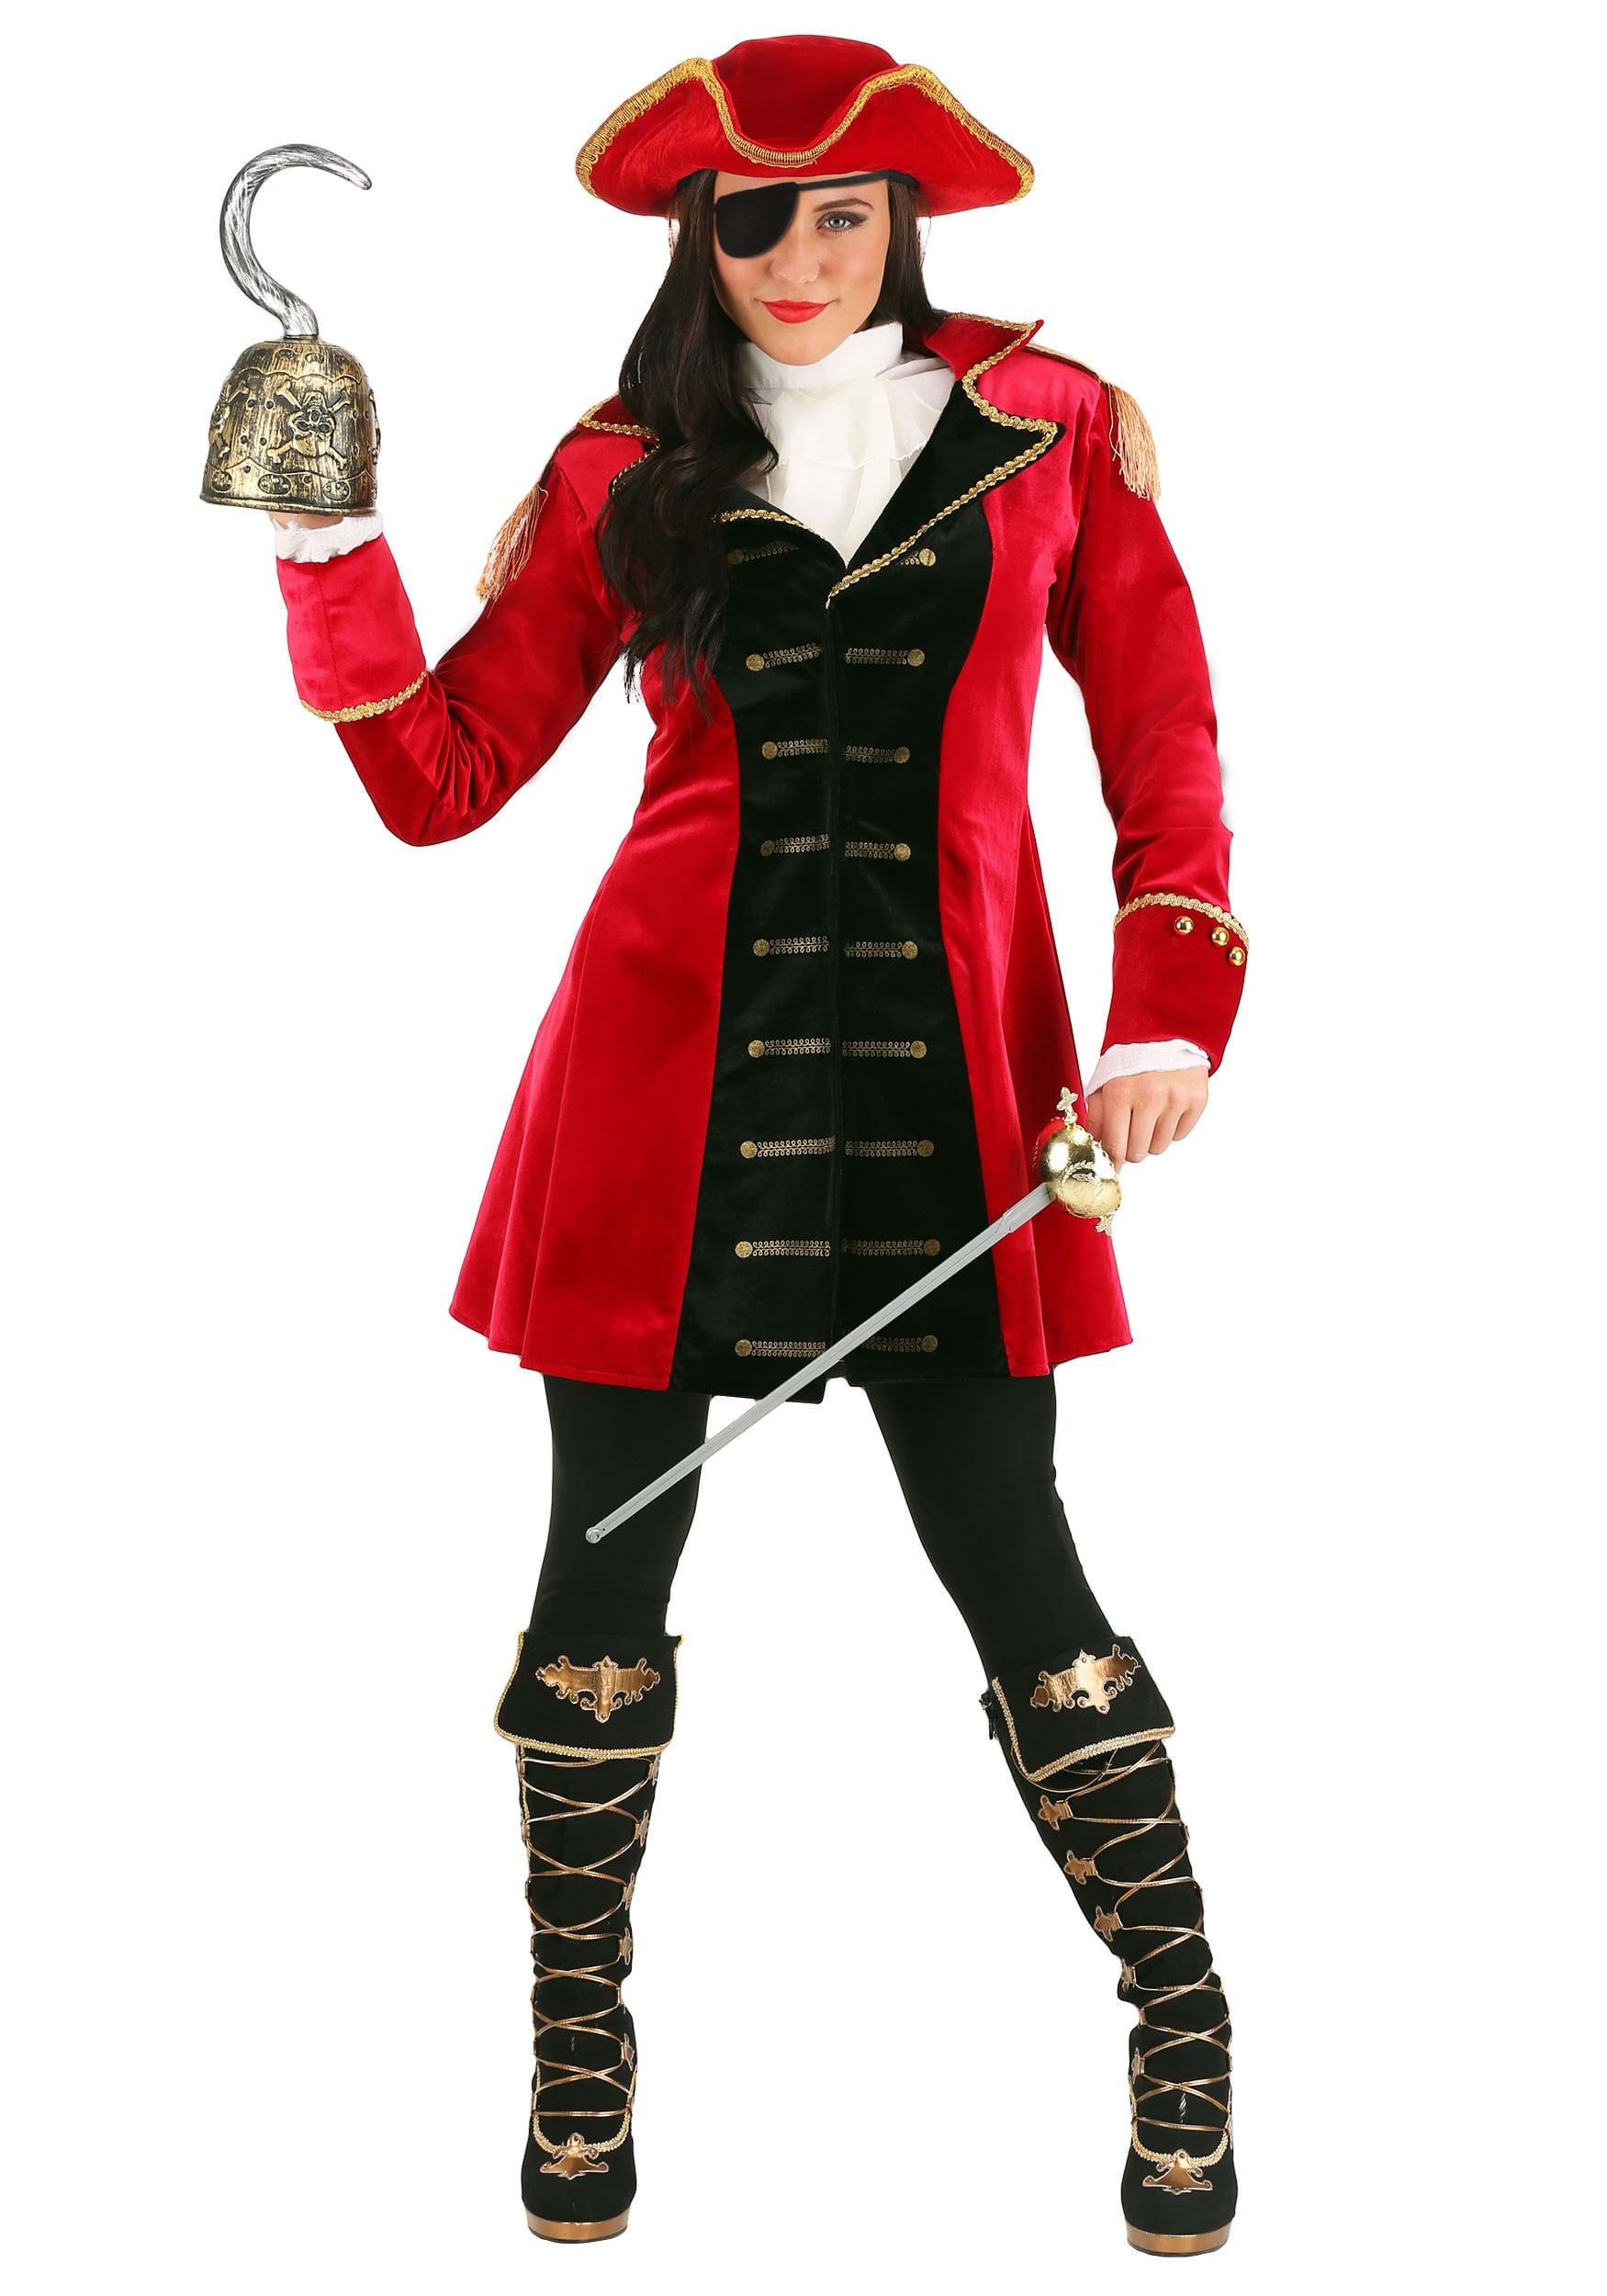 Adults Captain Hook Costume - X-Large - Red and Gold Pirate Coat